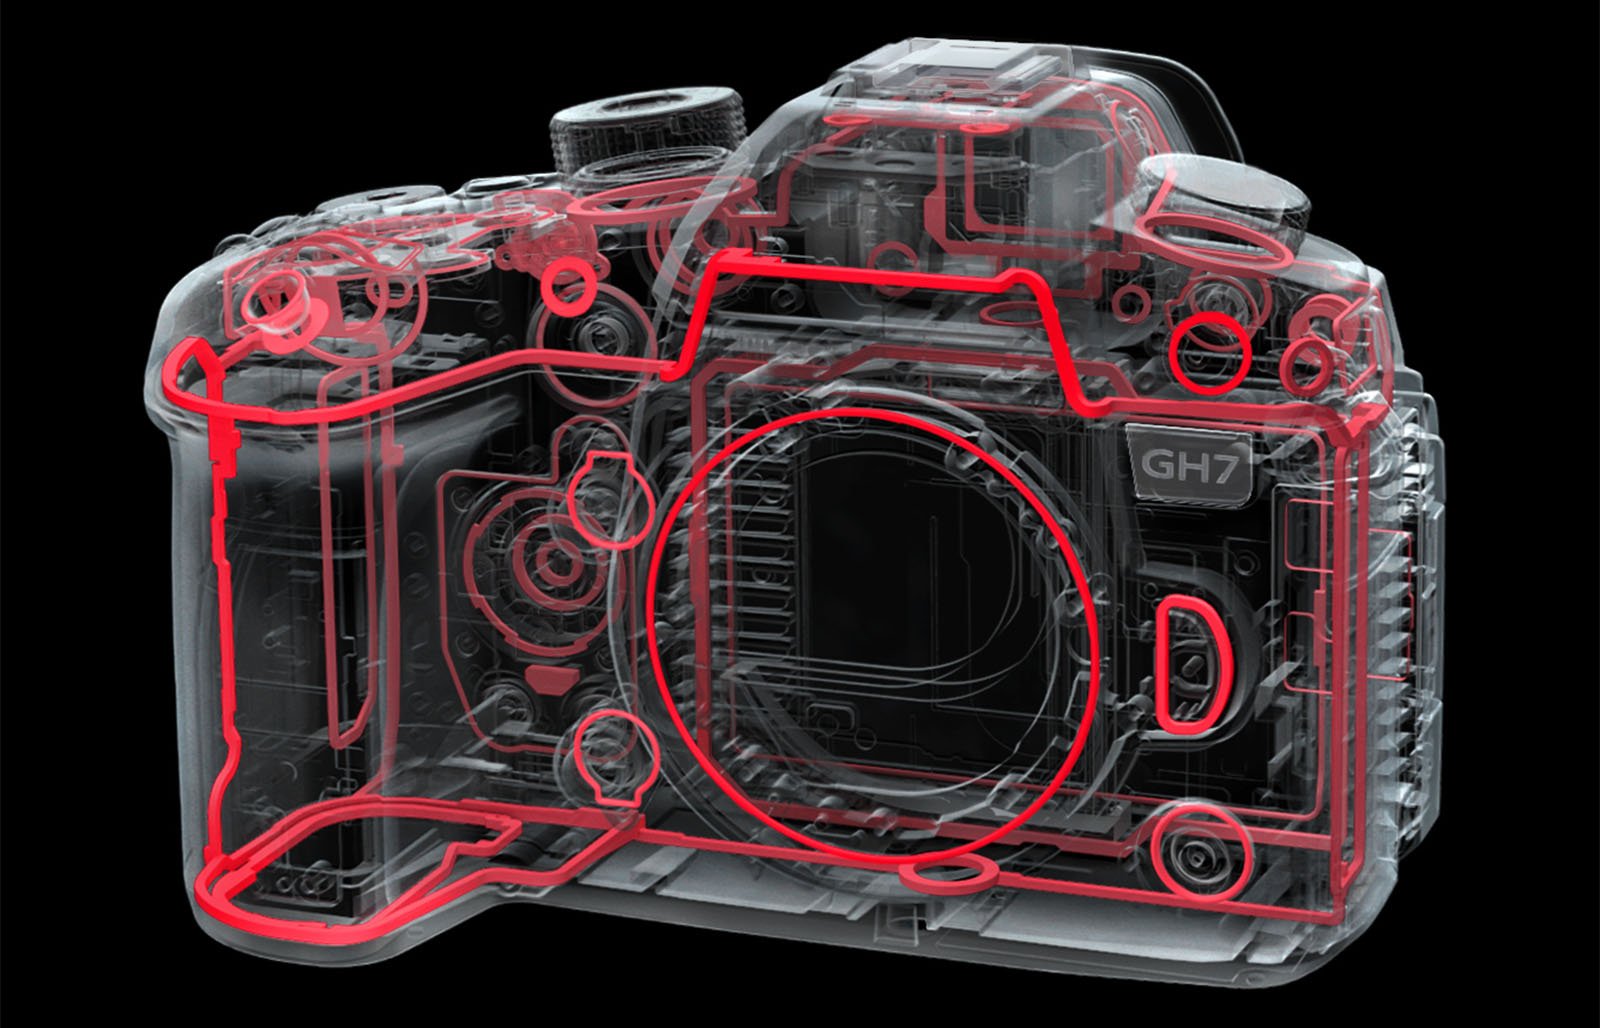 A transparent digital camera with highlighted internal components in red lines on a black background. The camera's model is labeled "GH7." The image showcases the intricate design and complex internal structure of the device.